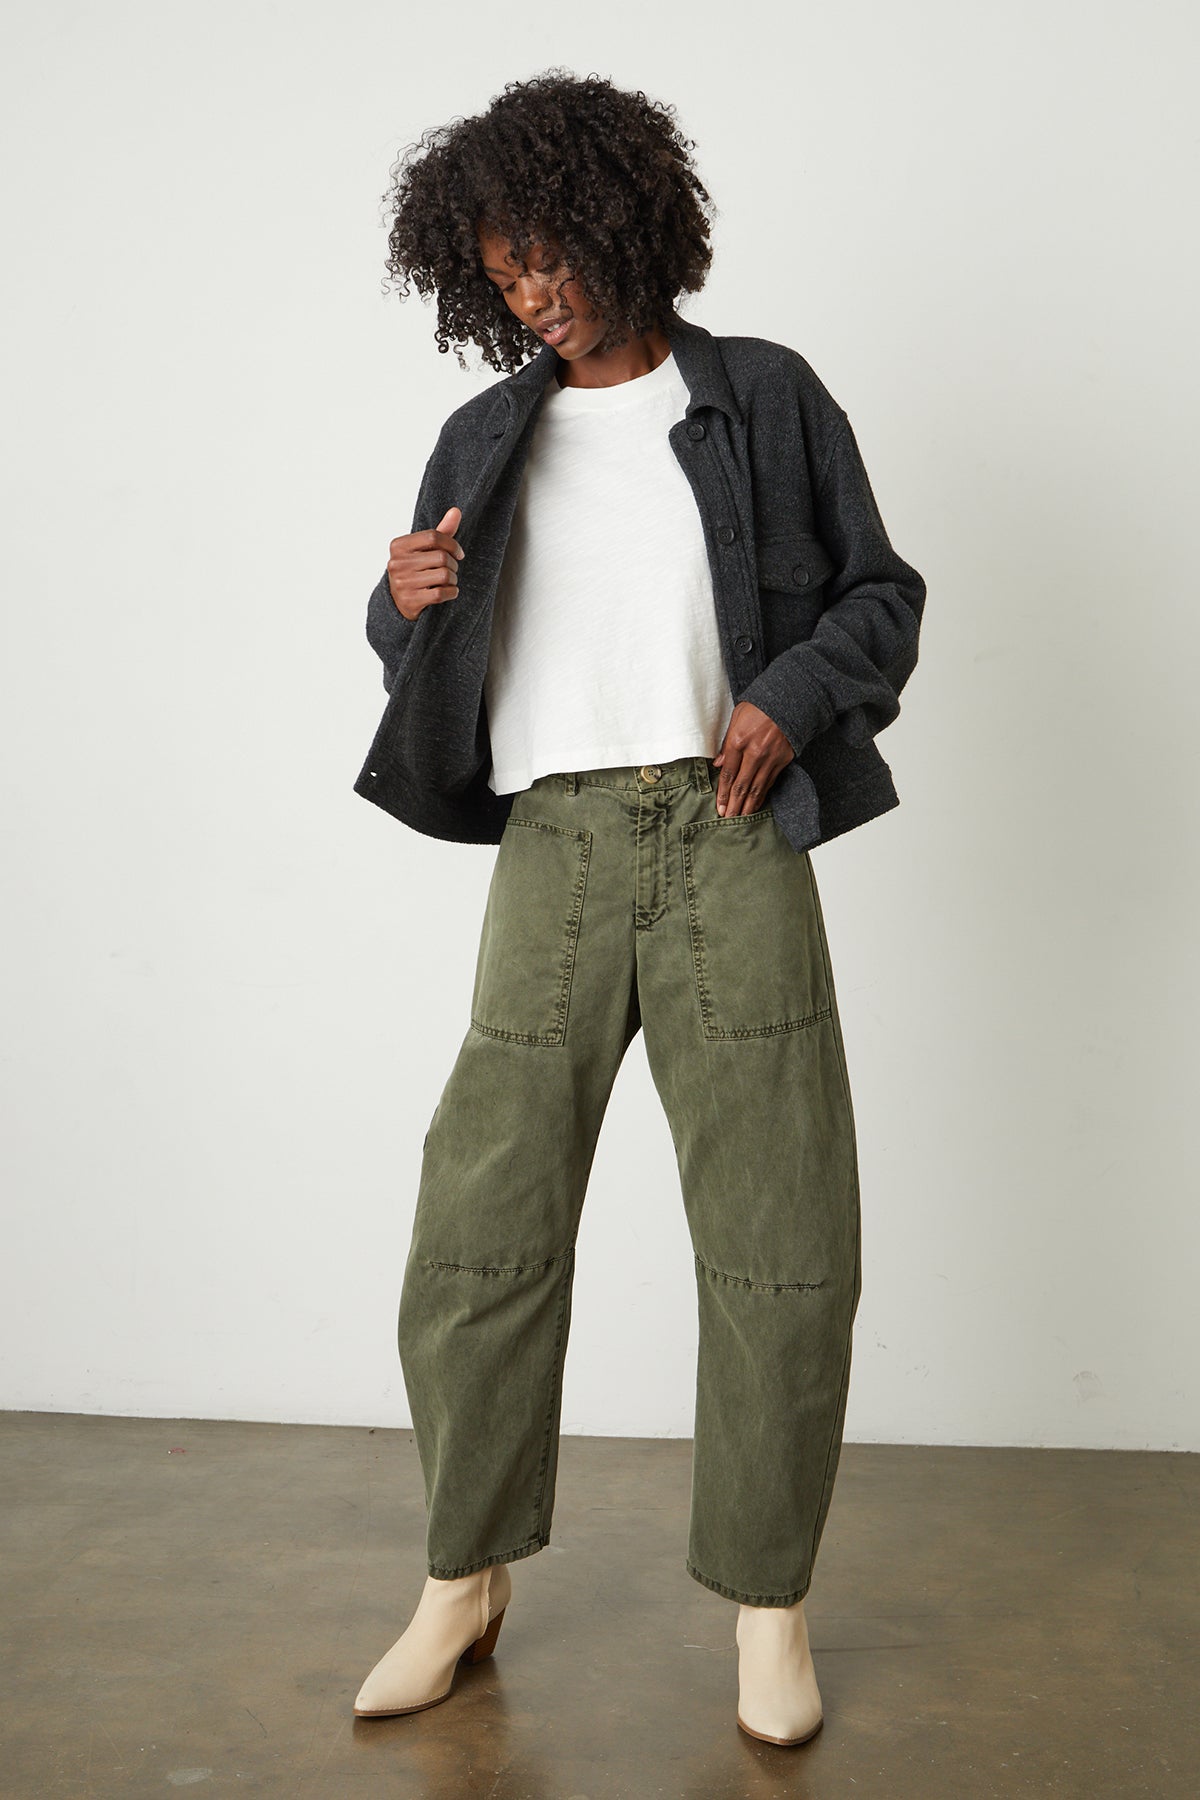 The model is wearing a pair of green cargo pants and a Velvet by Graham & Spencer KAMERON FLEECE SHACKET.-26068045430977